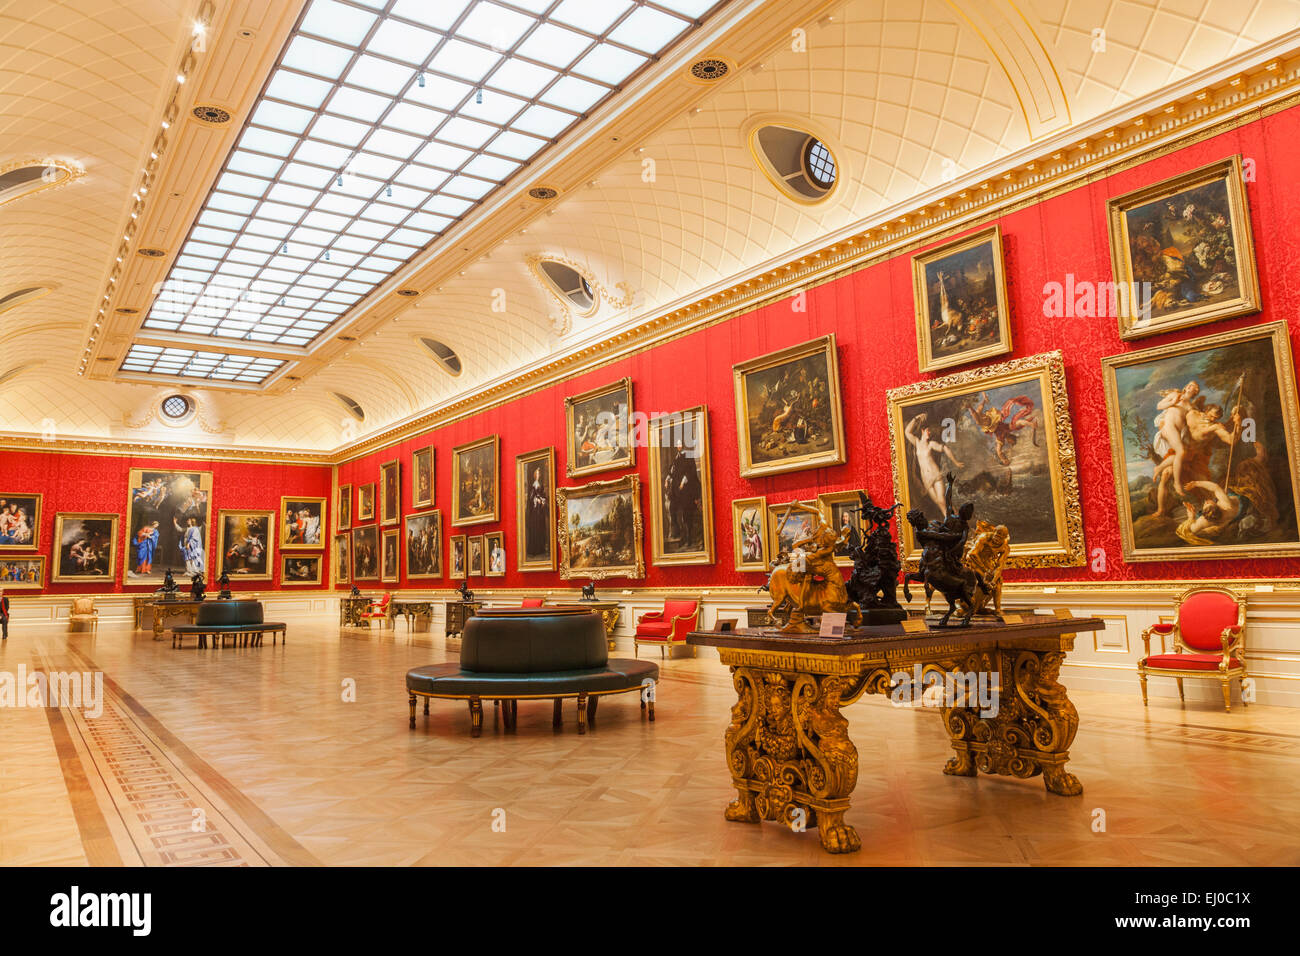 England, London, The Wallace Collection Museum, The Great Gallery Stock Photo